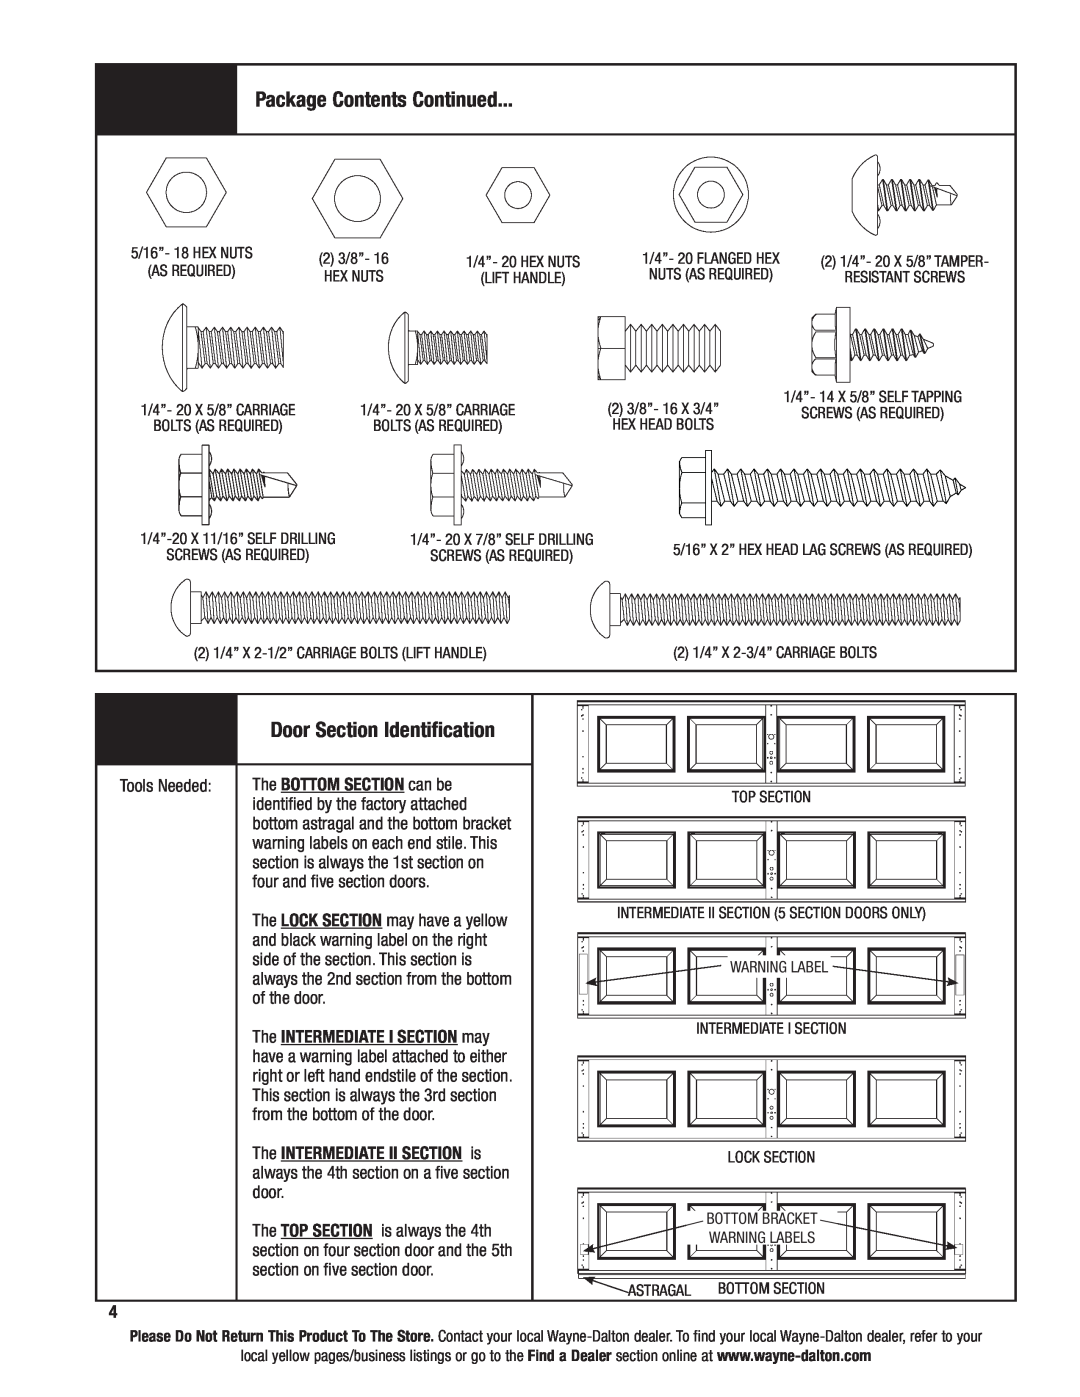 Wayne-Dalton 46 installation instructions Package Contents Continued, Door Section Identification 